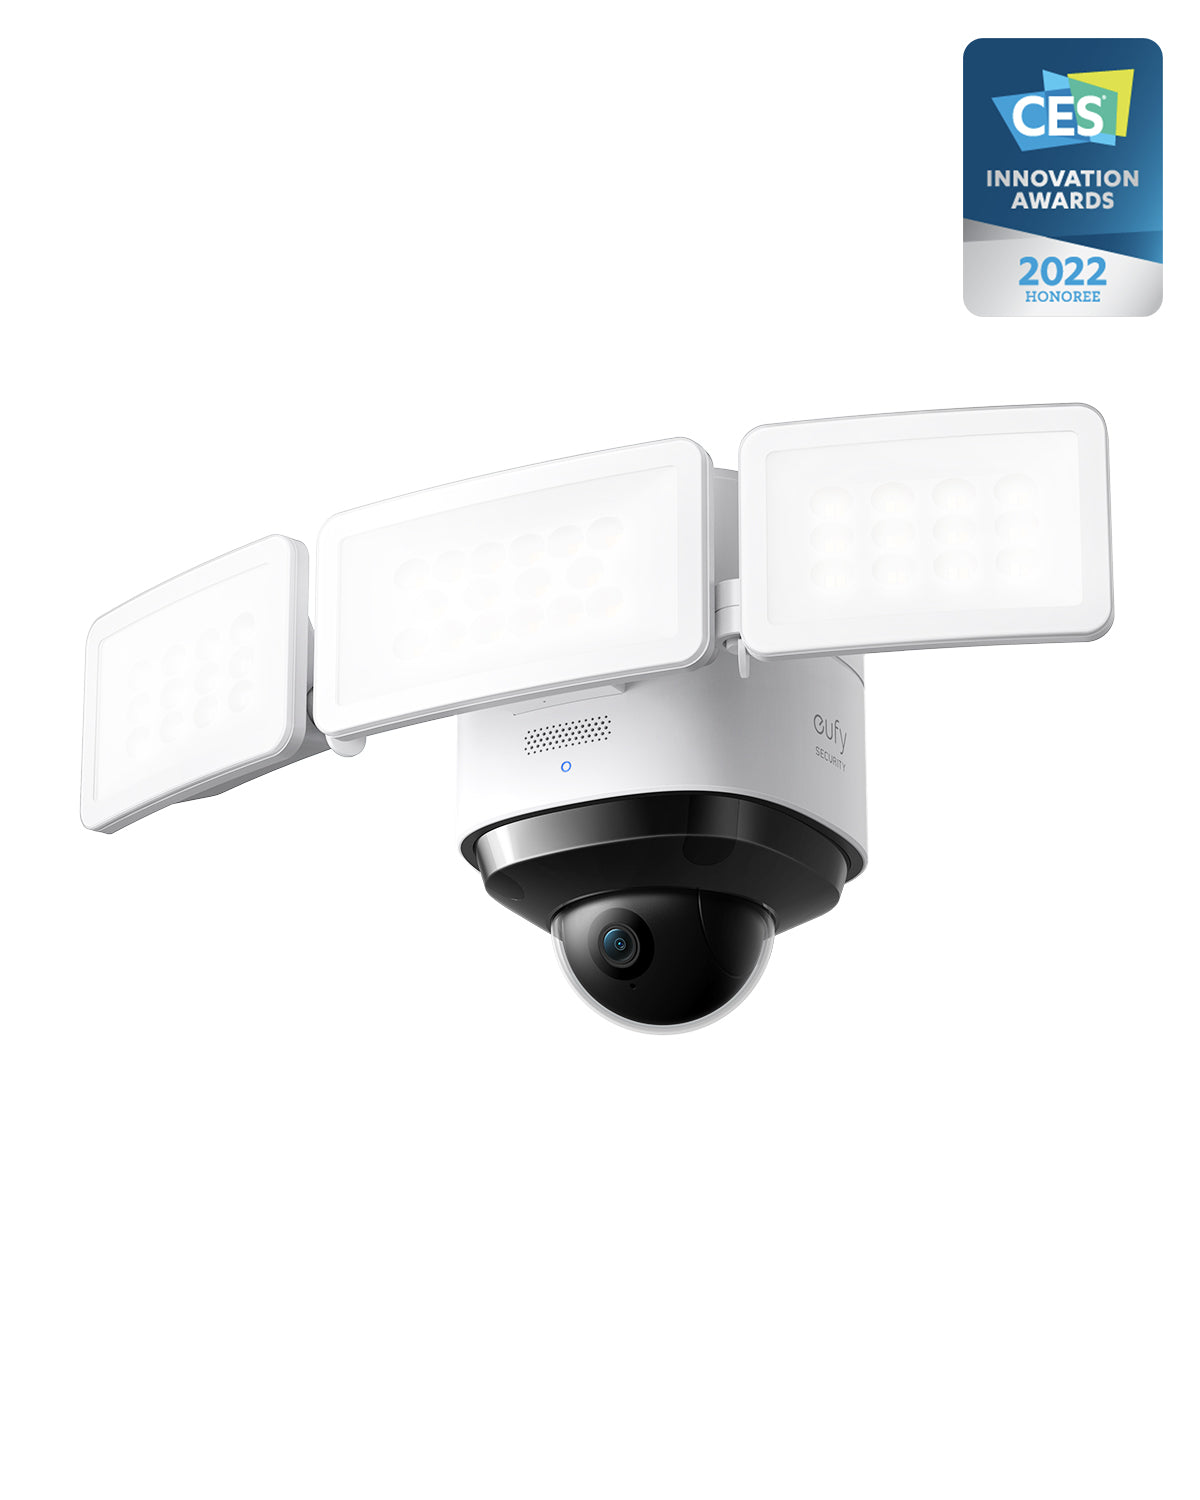 Home Security-Security Floodlight Cam S330, 360-Degree Pan & Tilt Coverage, 2K Full HD, 3,000 Lumens, Smart Lighting, Weatherproof, On-Device AI Subject Lock and Tracking, No Monthly Fee, Hardwired